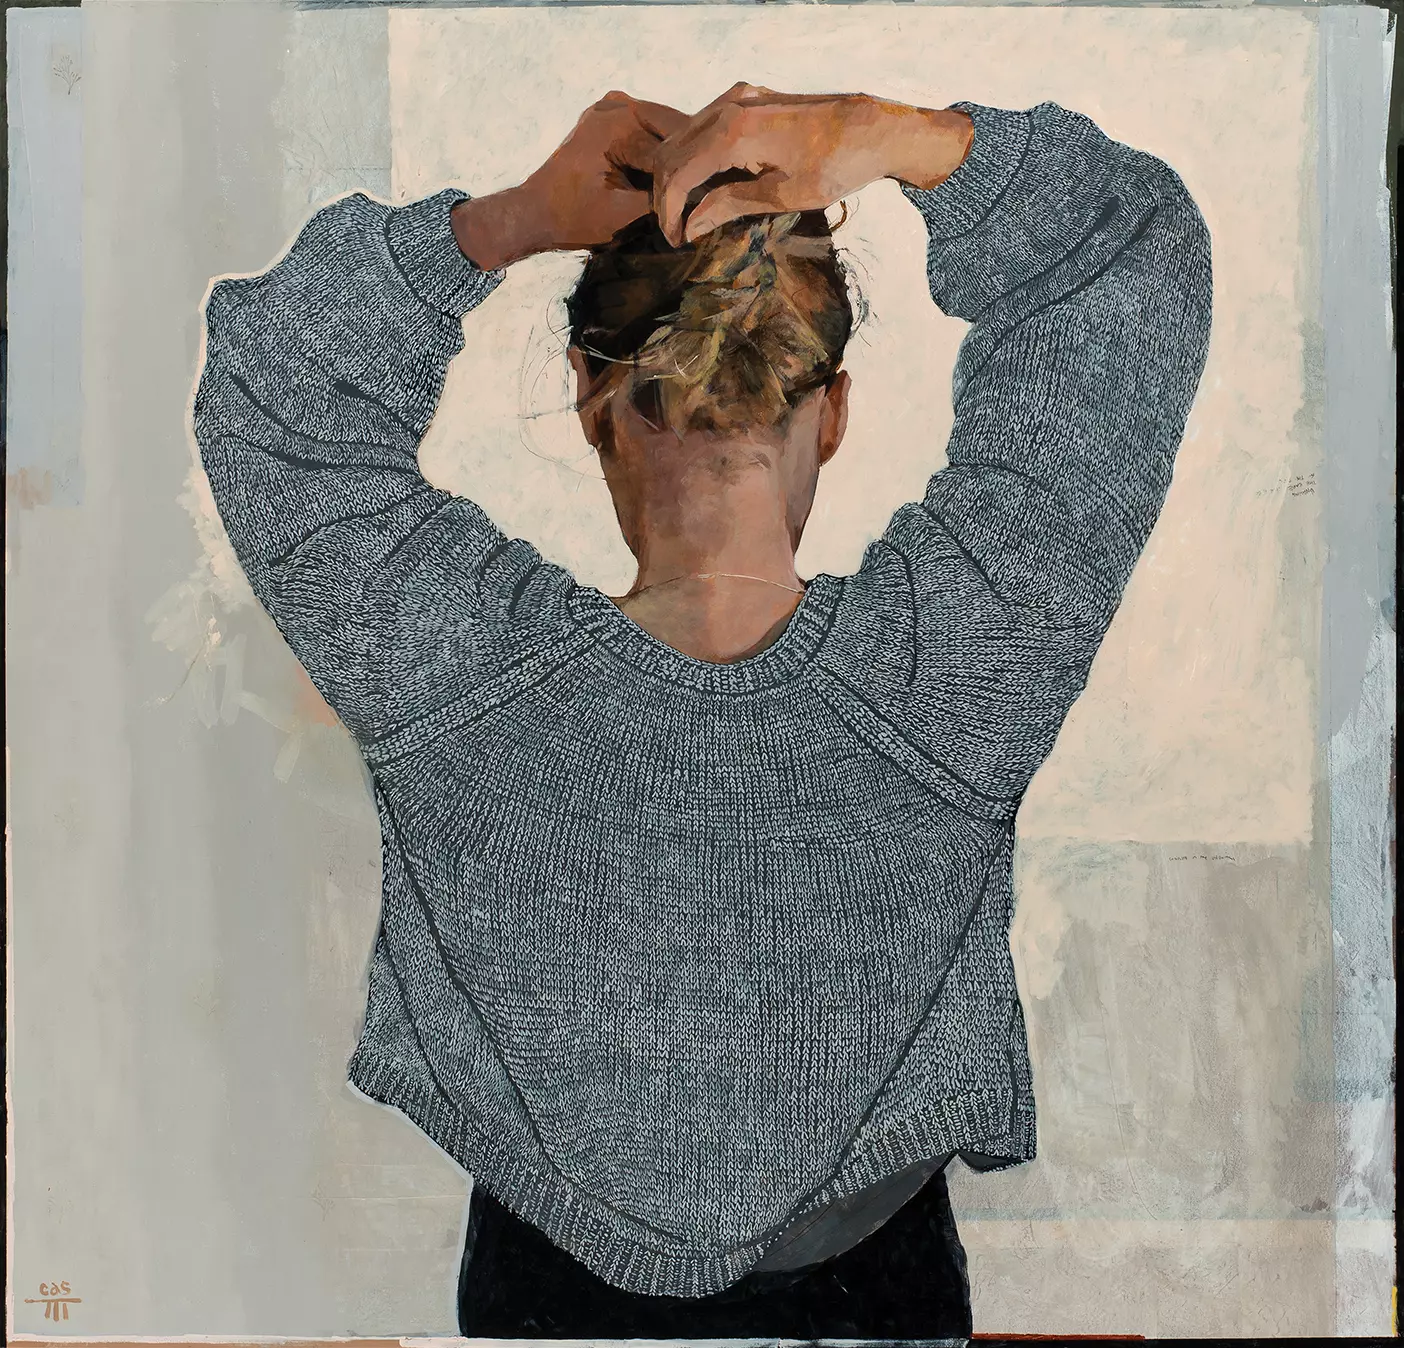 A painting by Colby A. Stanford of a woman twisting her hair into an updo.